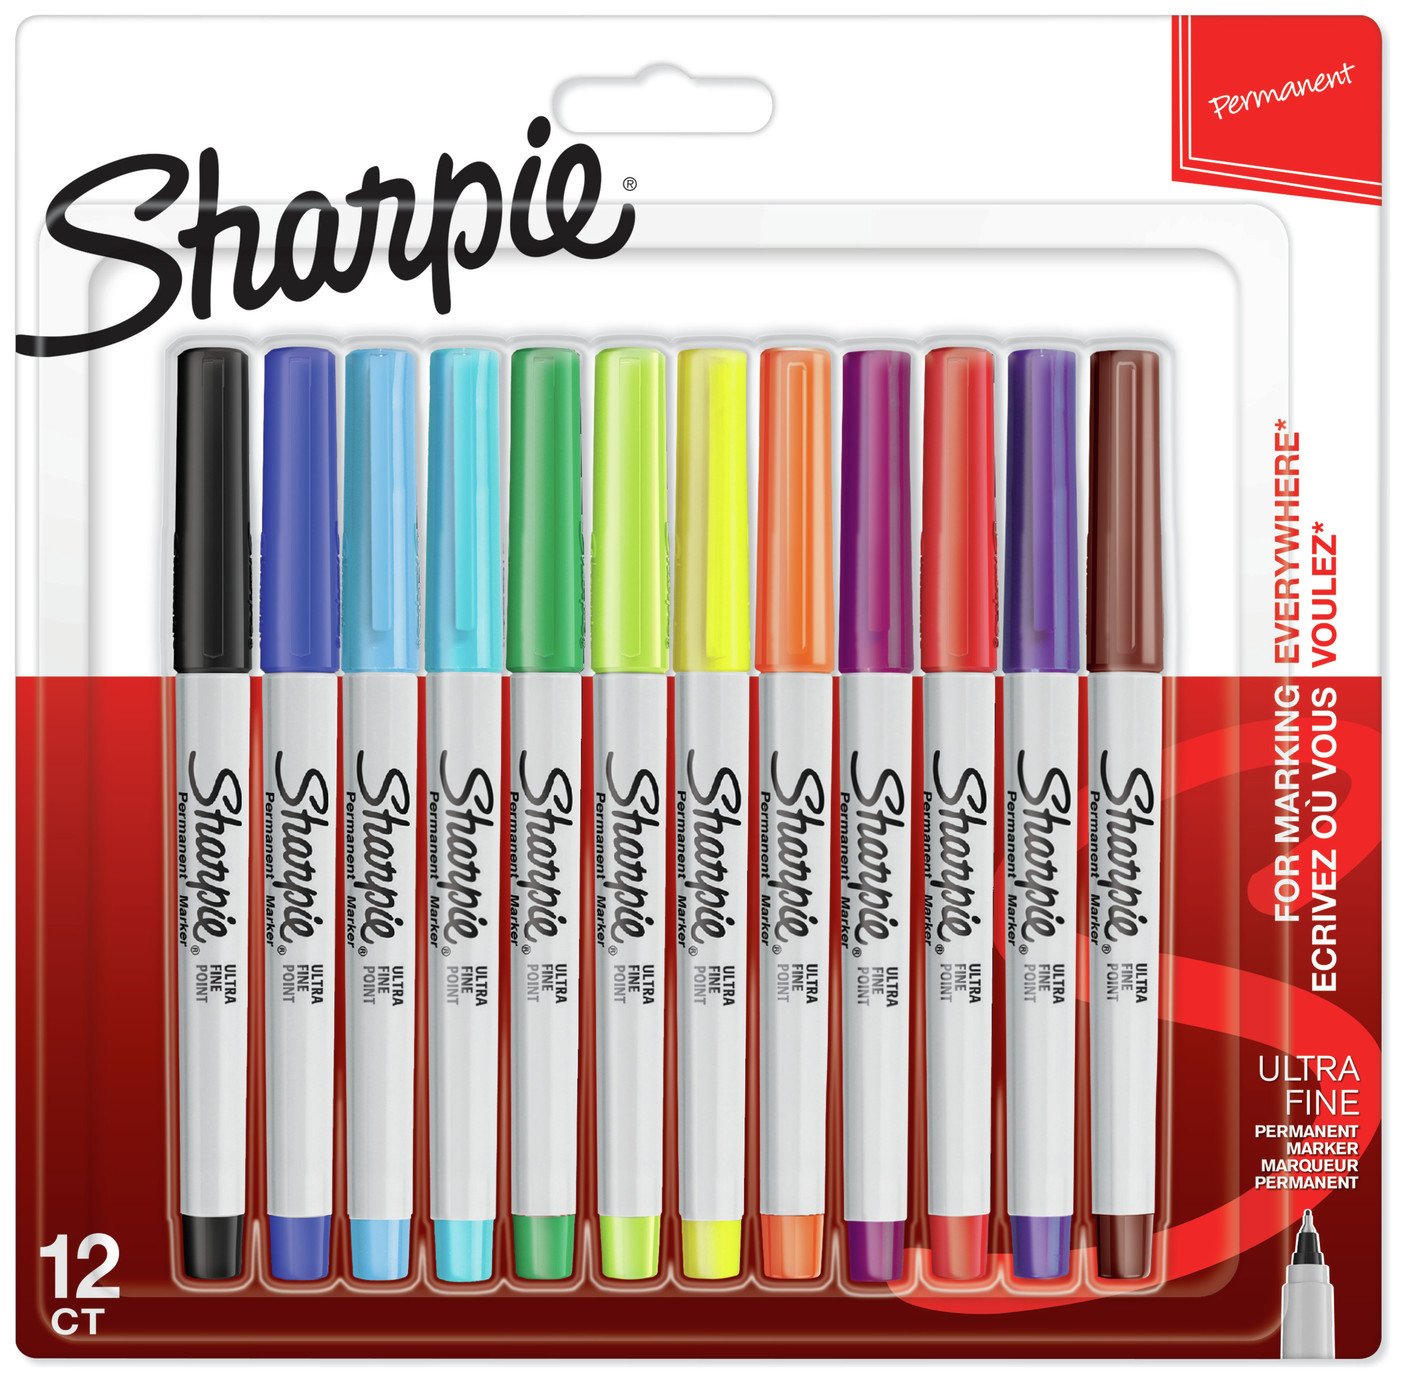 Sharpie Ultra Fine Assorted Permanent Markers - 12 Pack